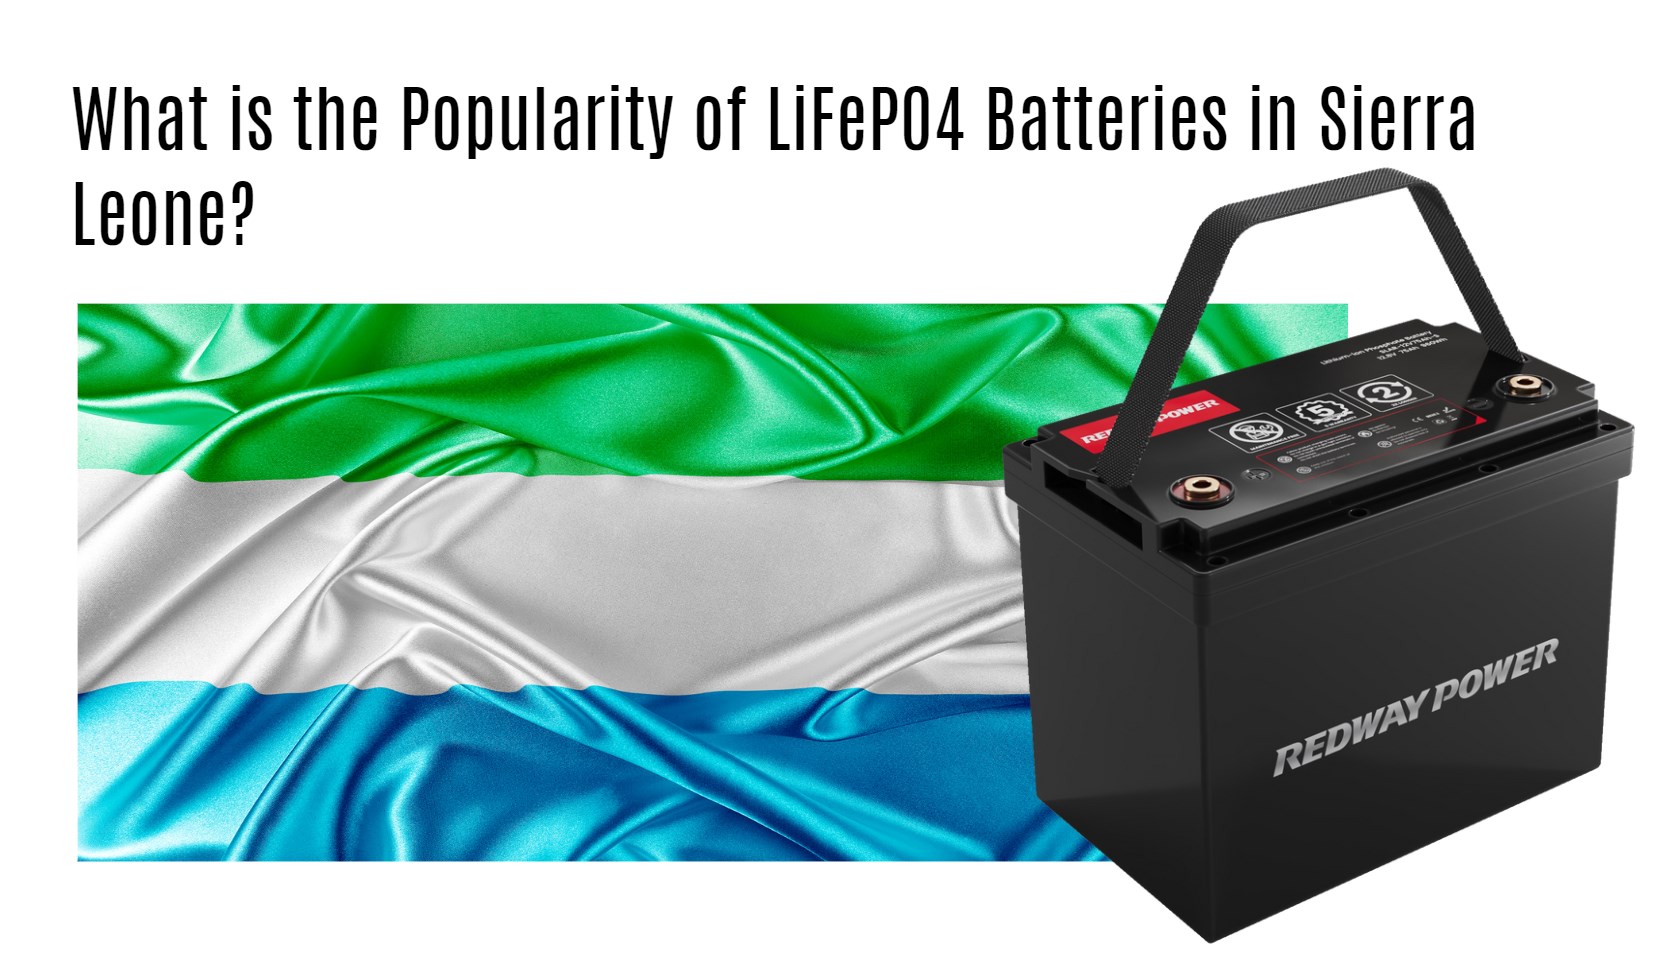 What is the Popularity of LiFePO4 Batteries in Sierra Leone?